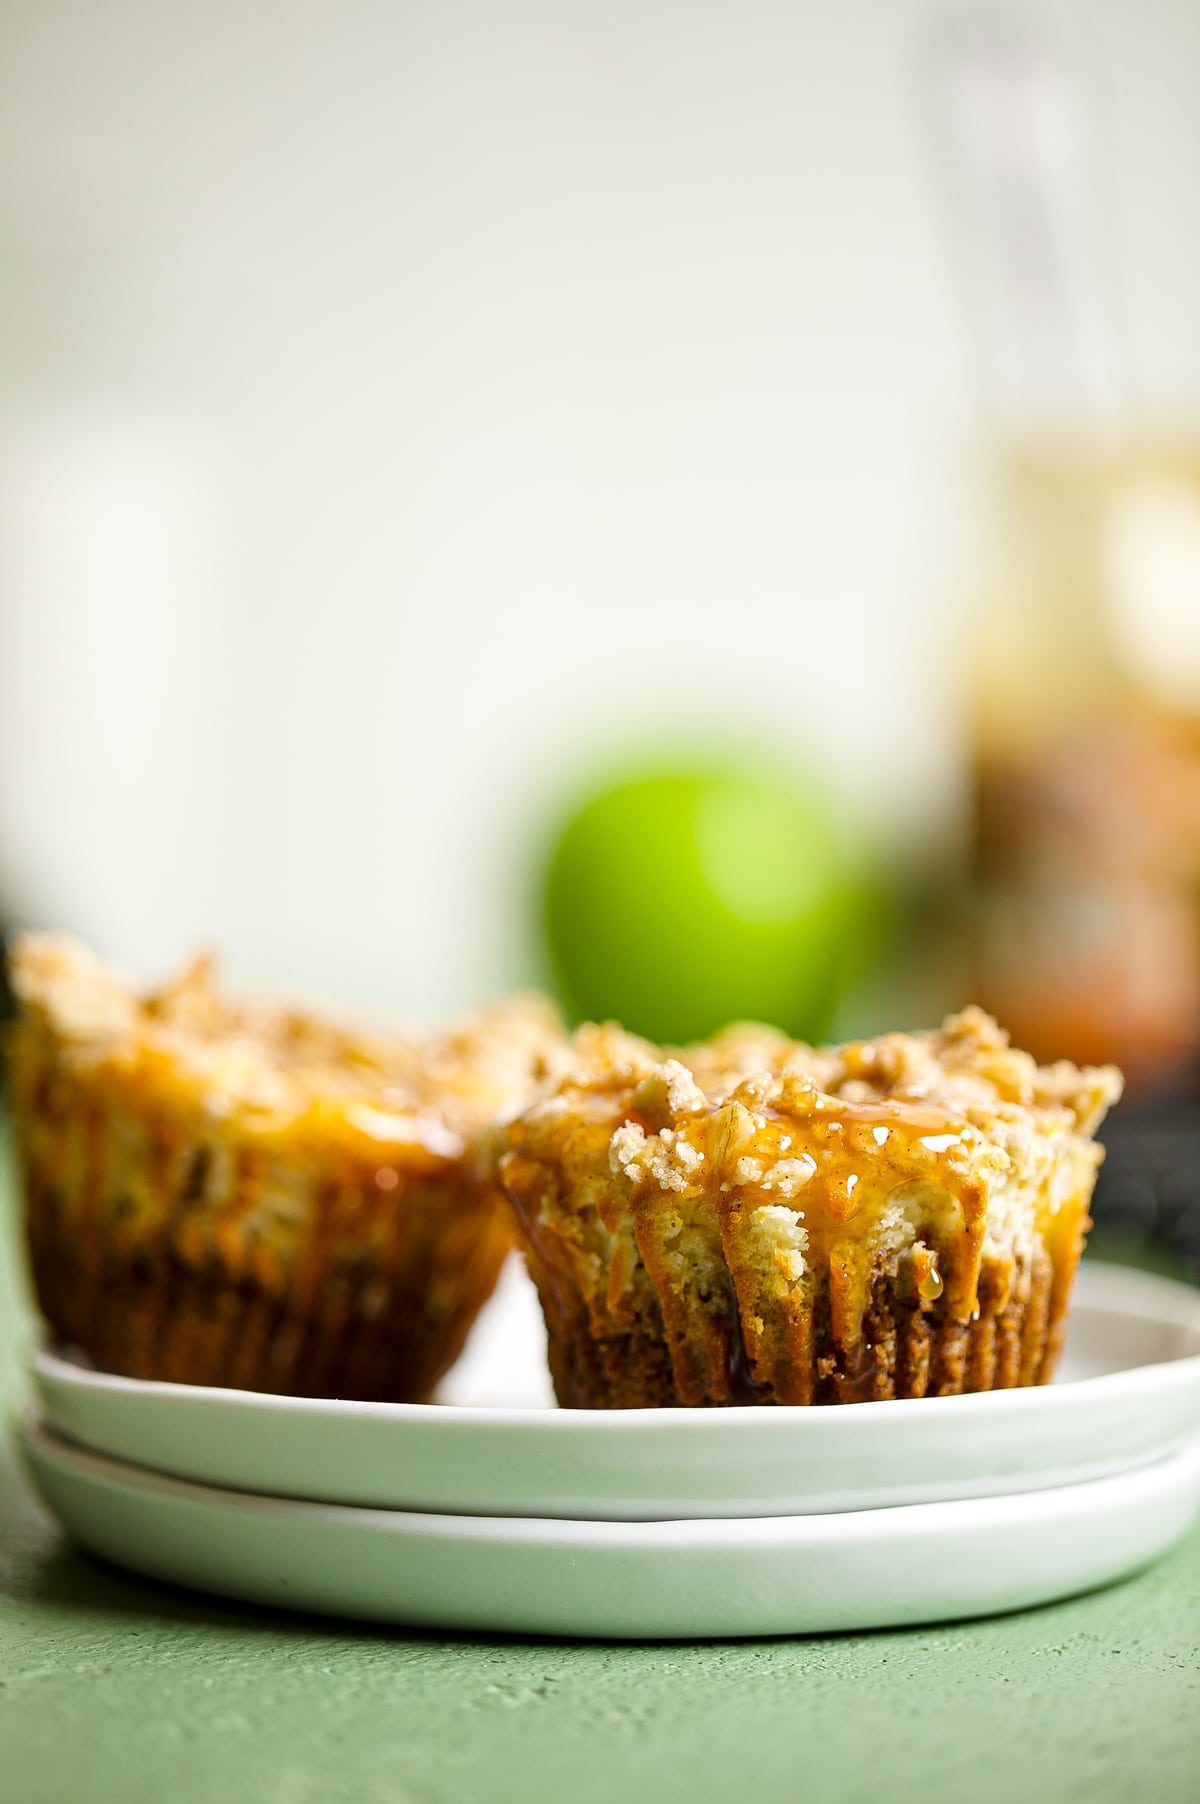 Two Mini Salted Caramel Apple Streusel Cheesecake Bites on small plates.